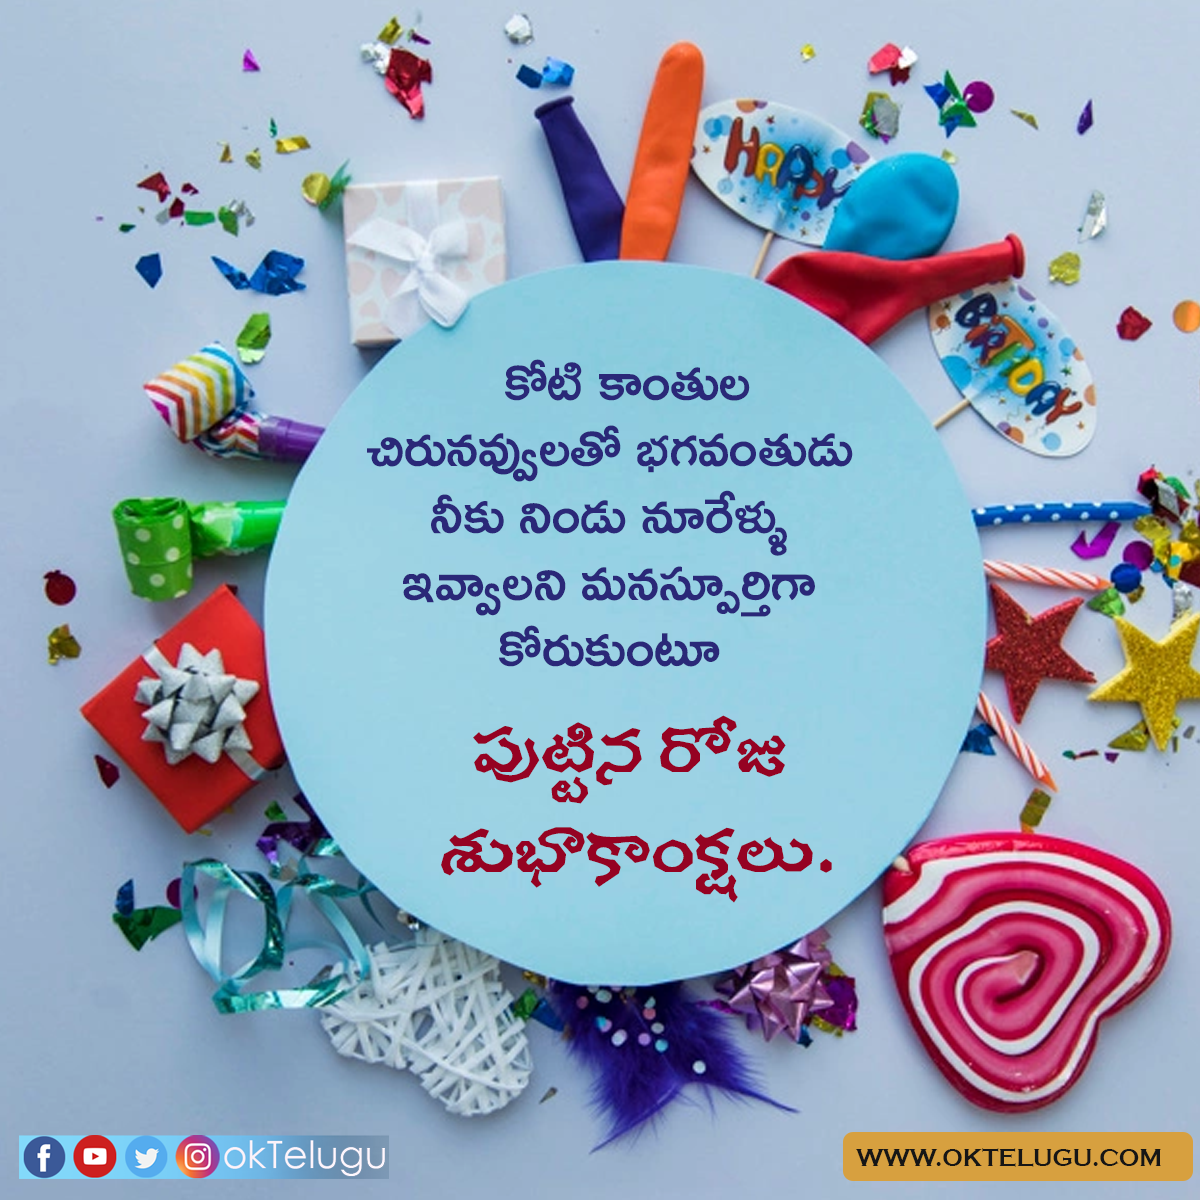 Happy Birthday Greetings Wishes, quotes, Messages in Telugu 